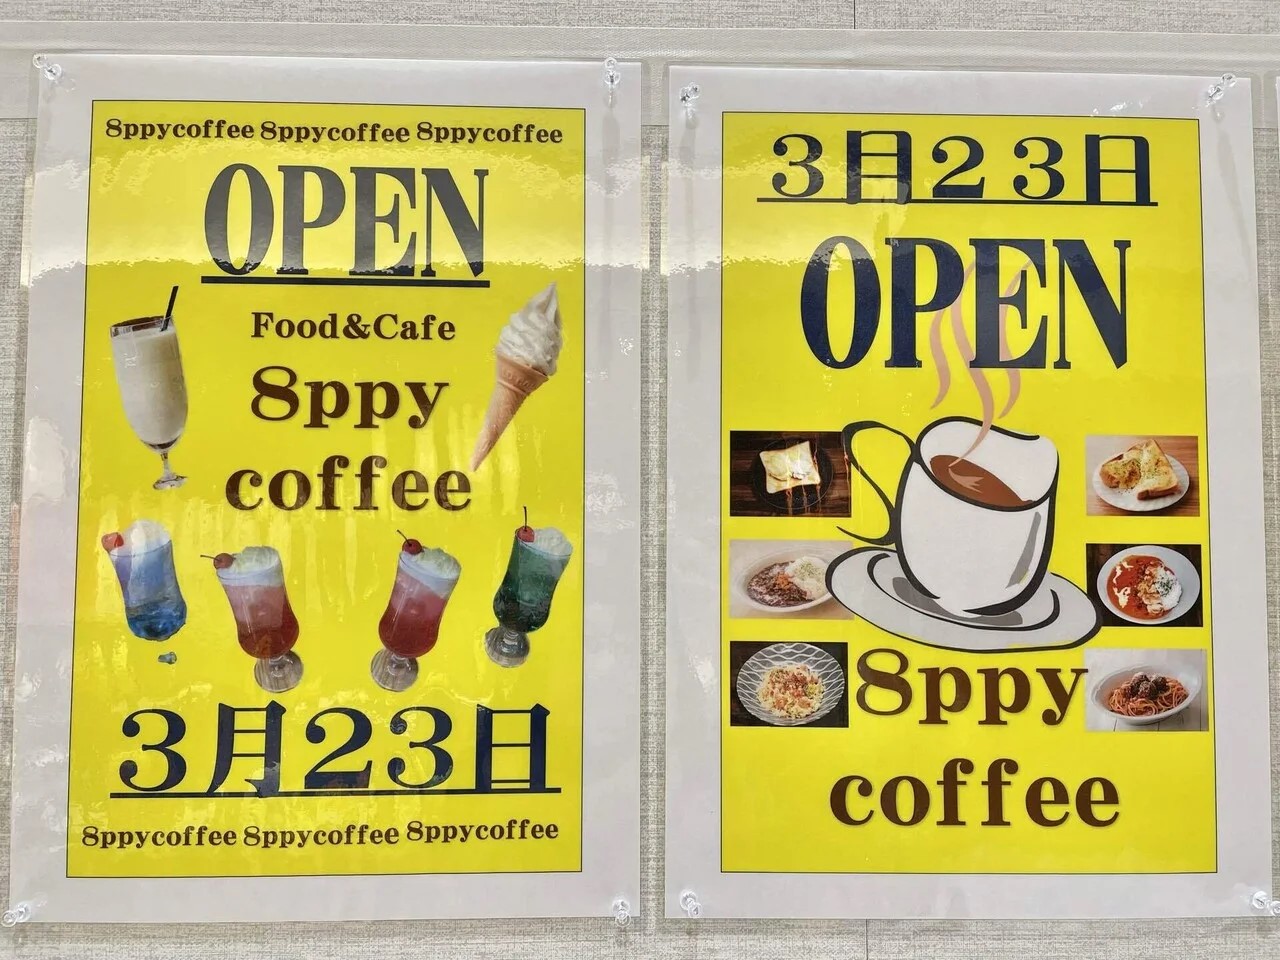 8ppy coffeeが3月23日にオープン予定